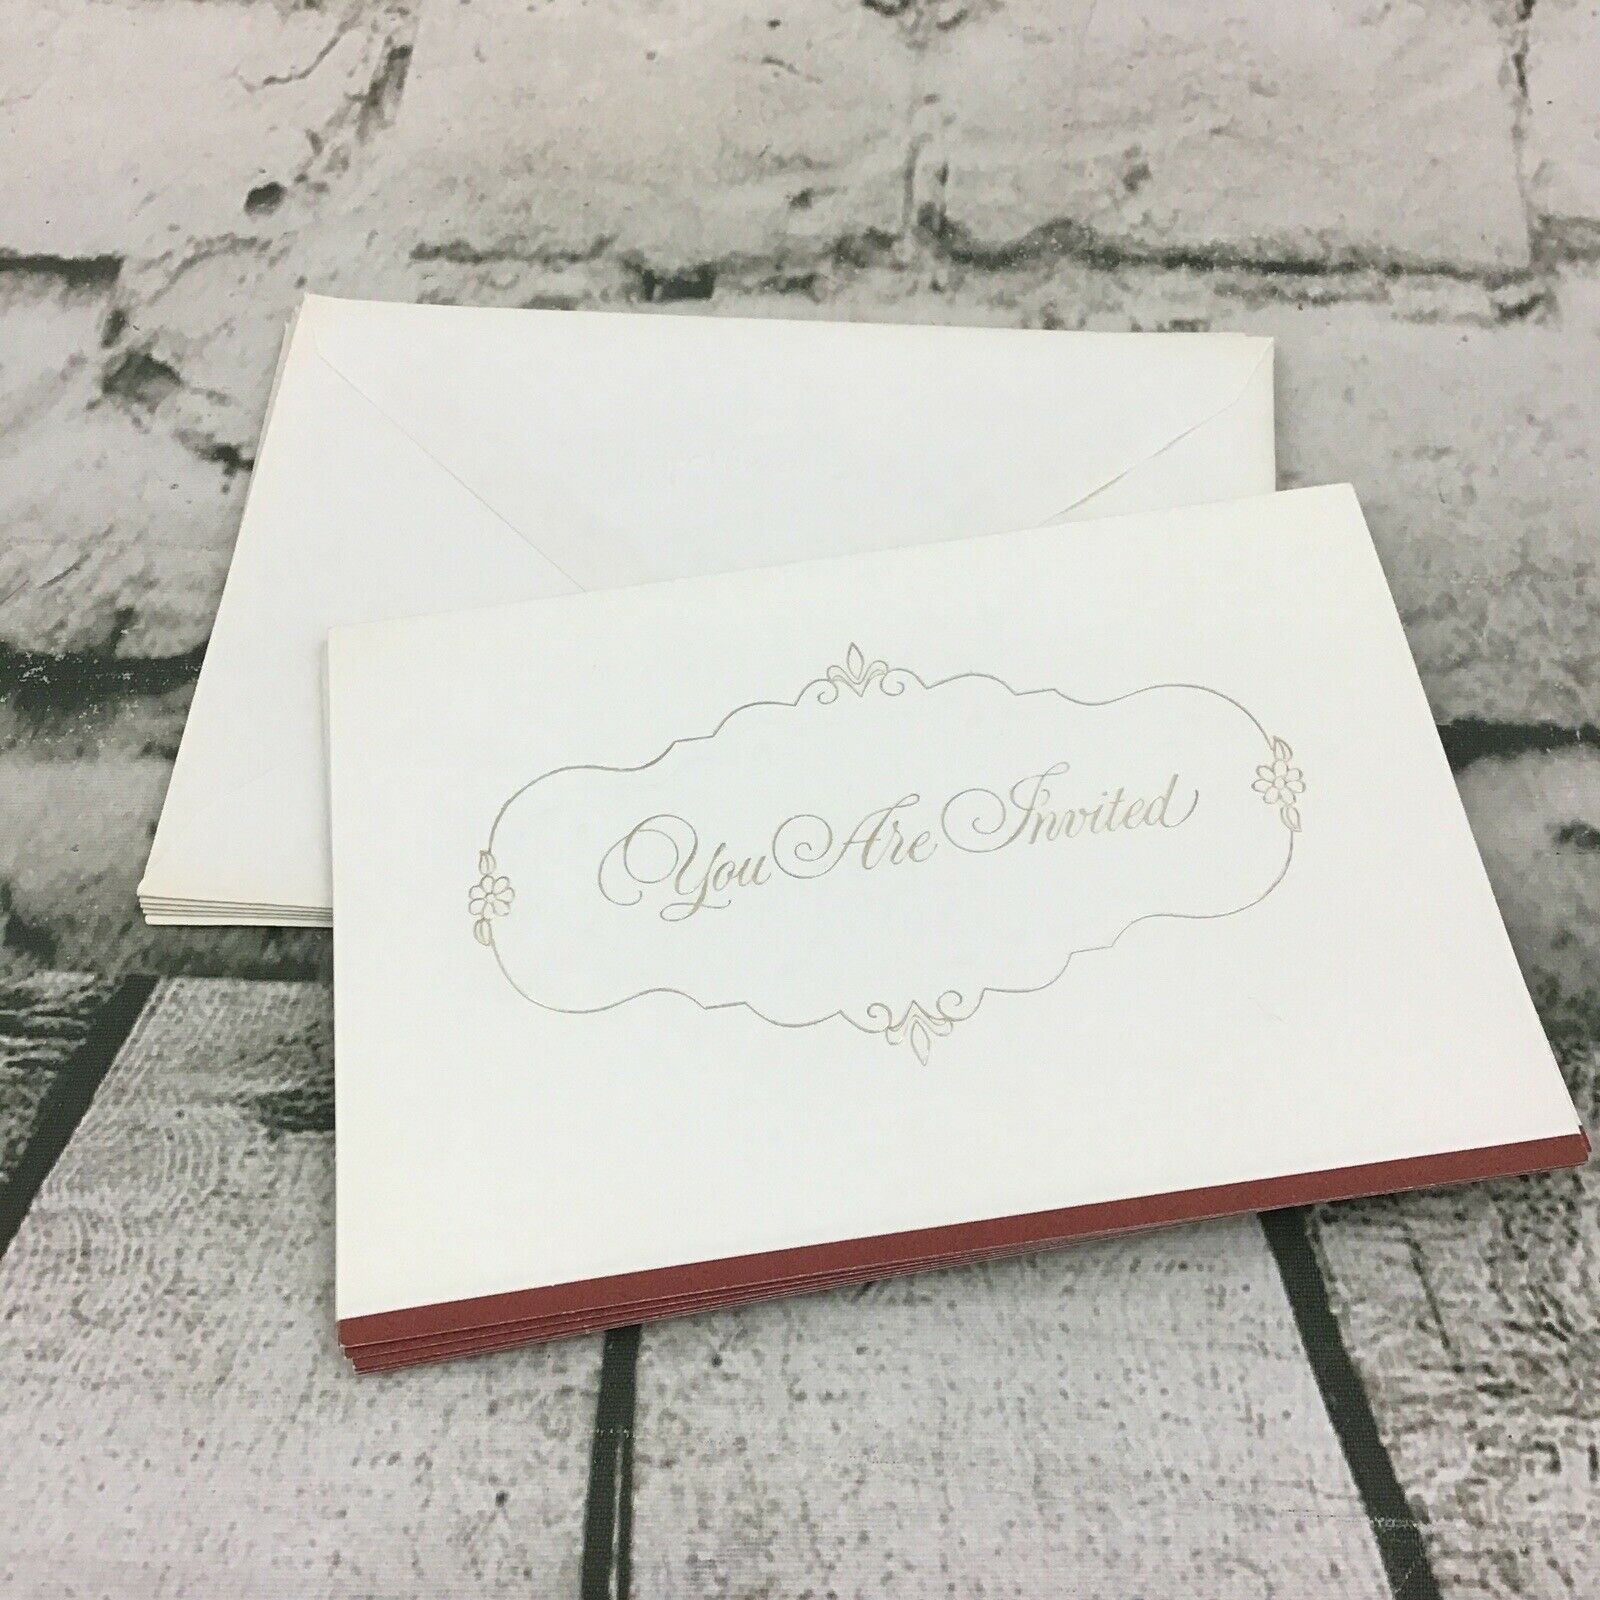 Vintage Hallmark You Are Invited Embossed Invitations Lot Of 6 With Envelopes - $11.88